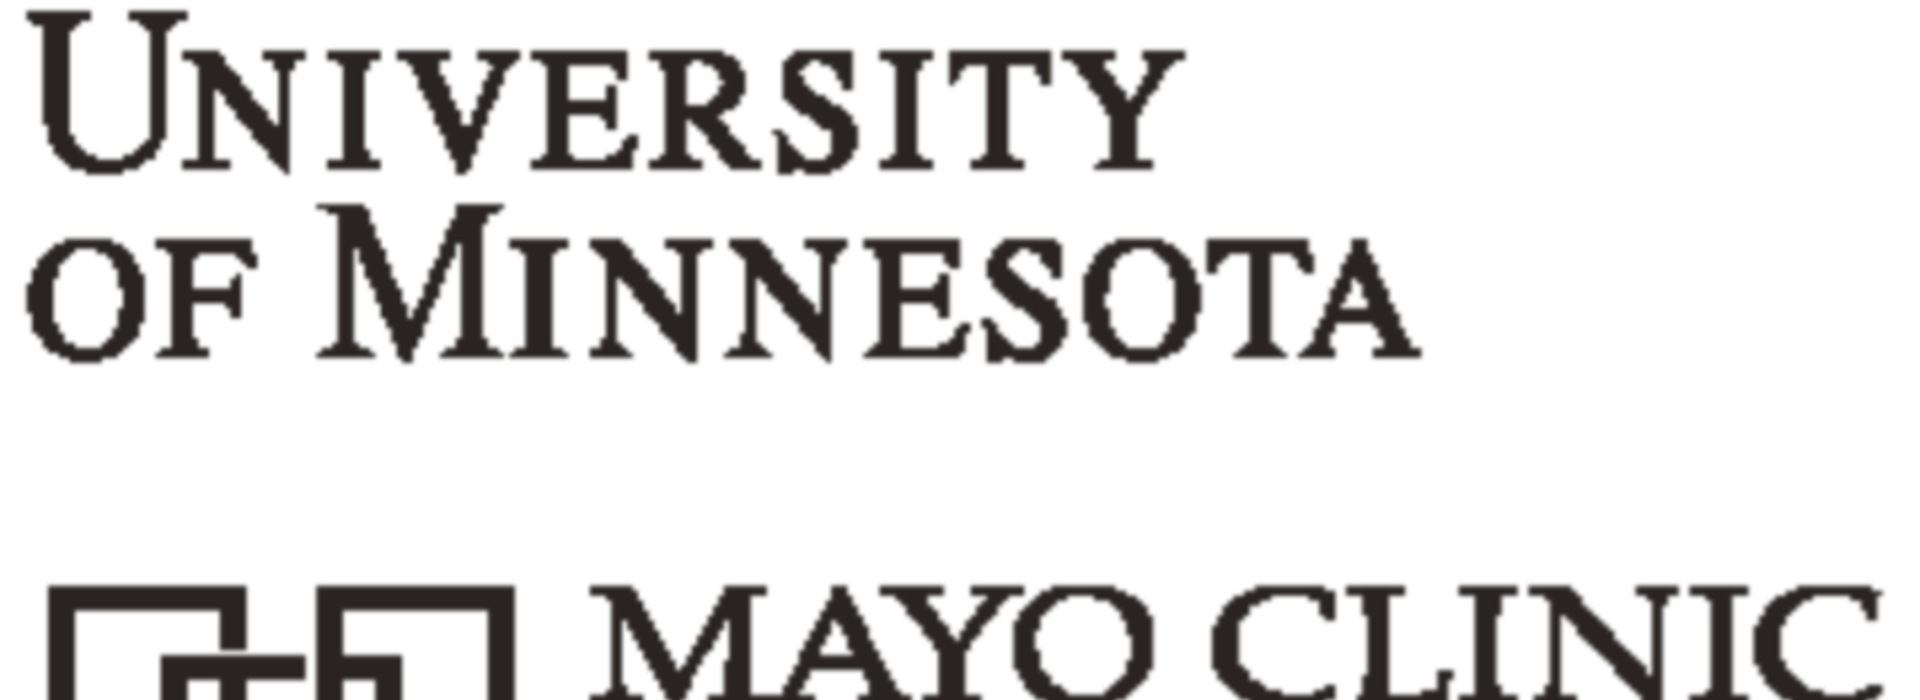 Black text that says "University of Minnesota" above text that says "Mayo Clinic" next to a shield logo